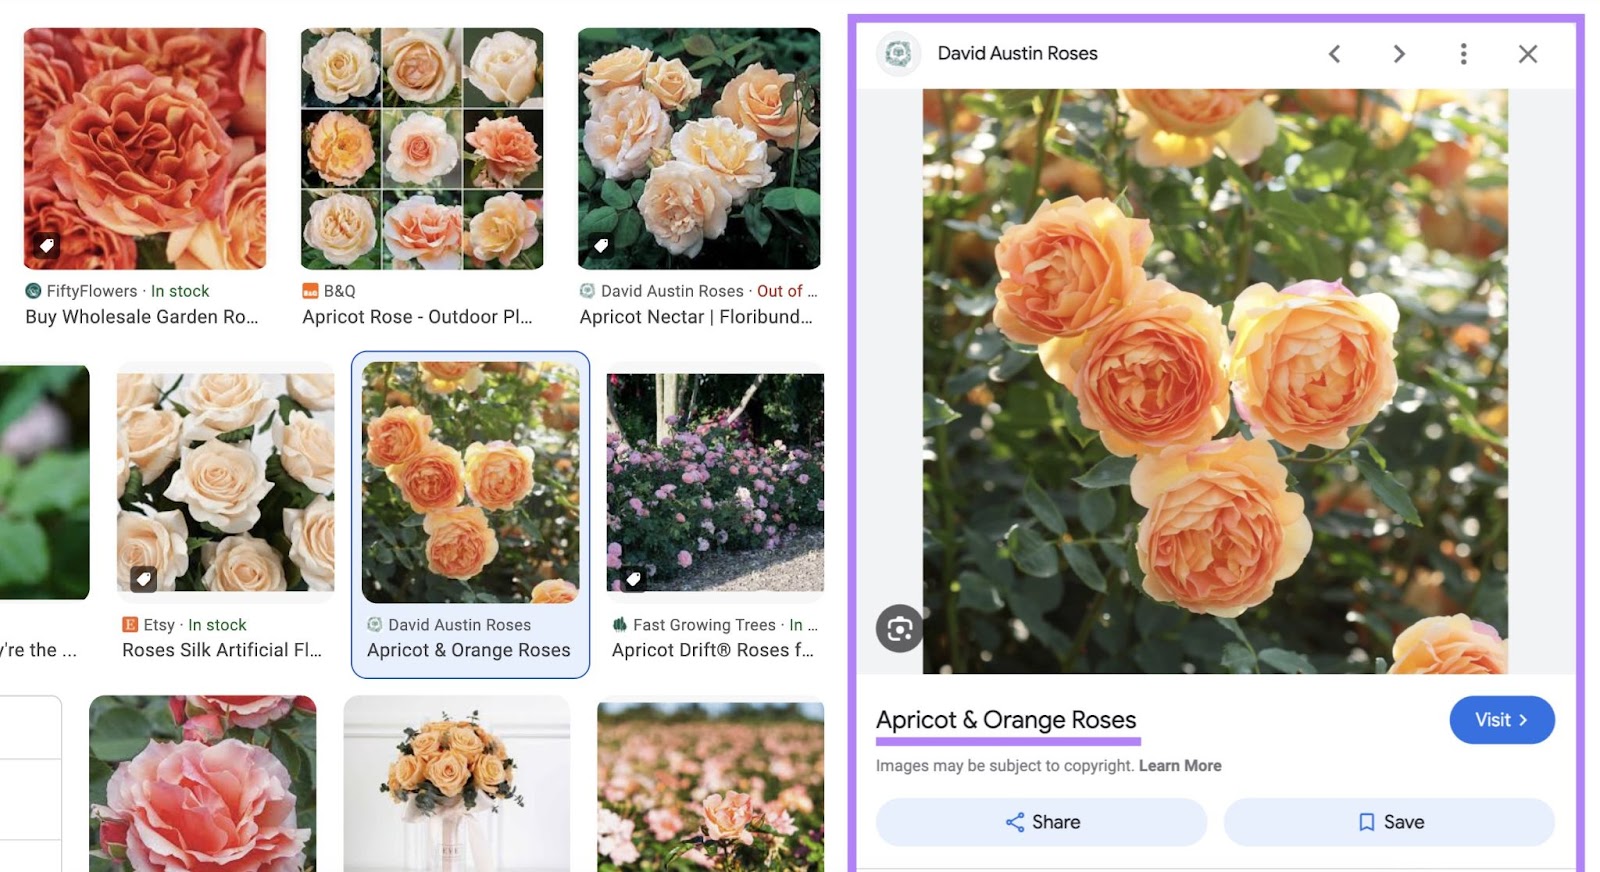 expanded google image result of a rose shows the title tag